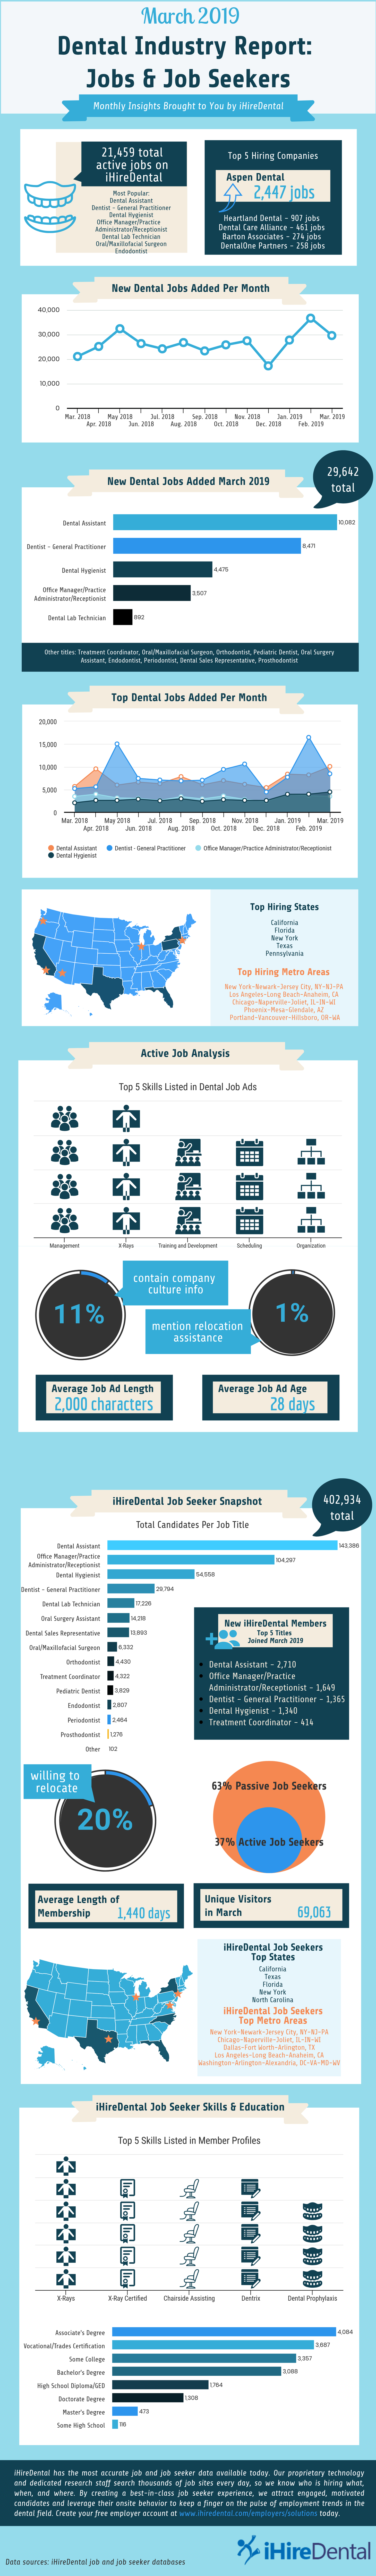 ihiredental march 2019 dental industry infographic